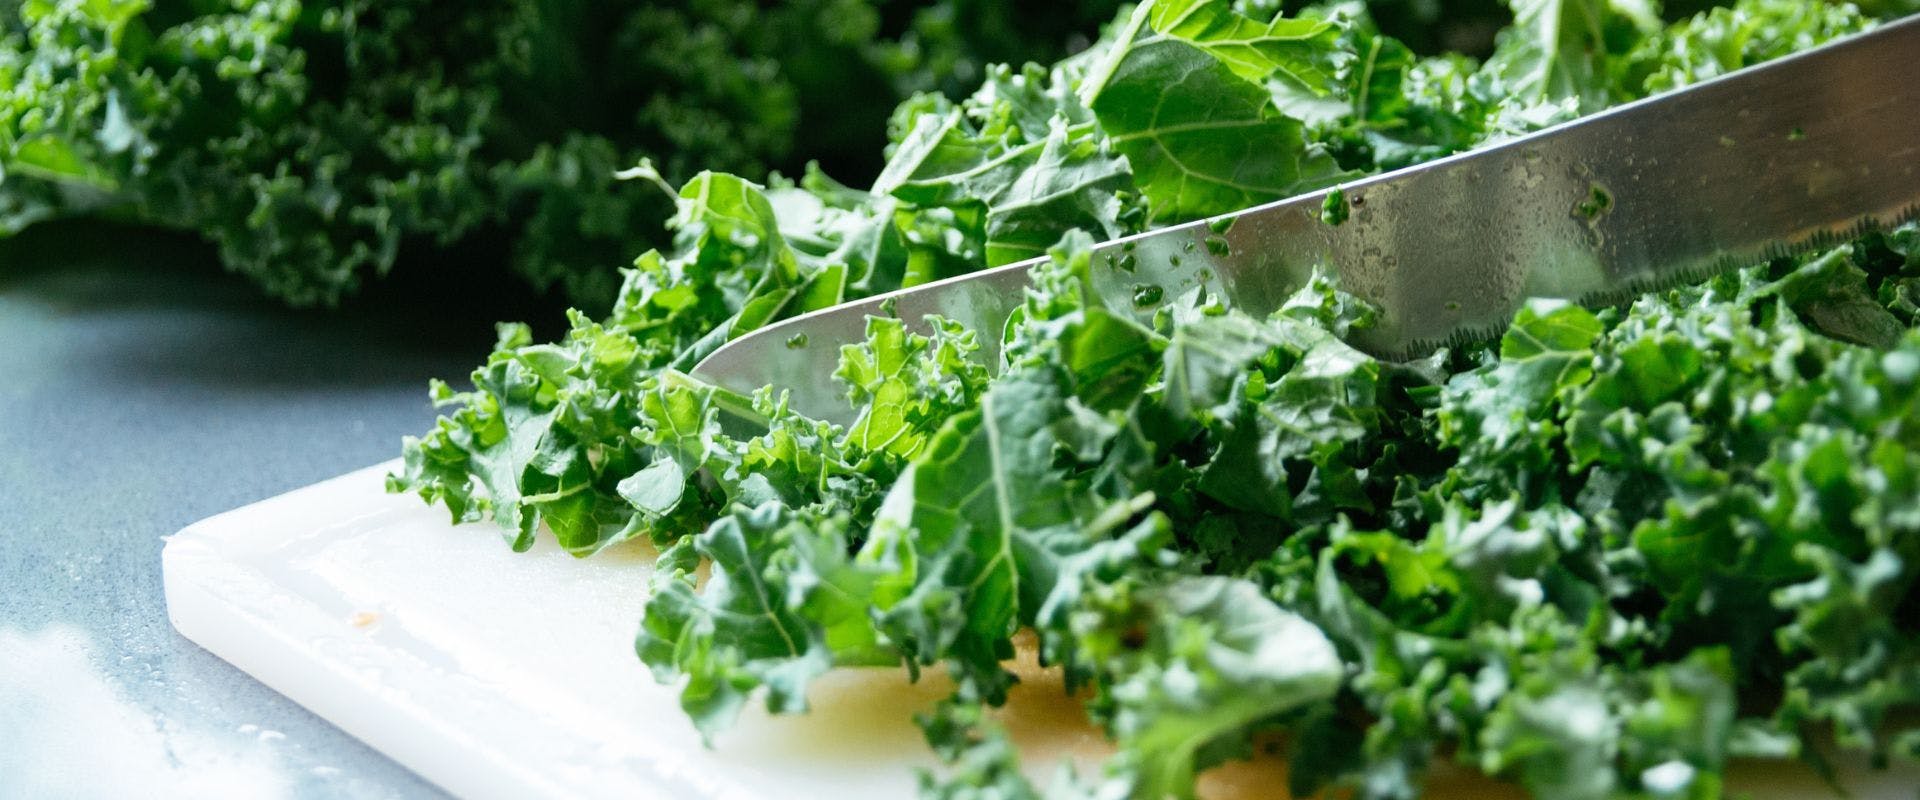 Kale being sliced on a chopping board